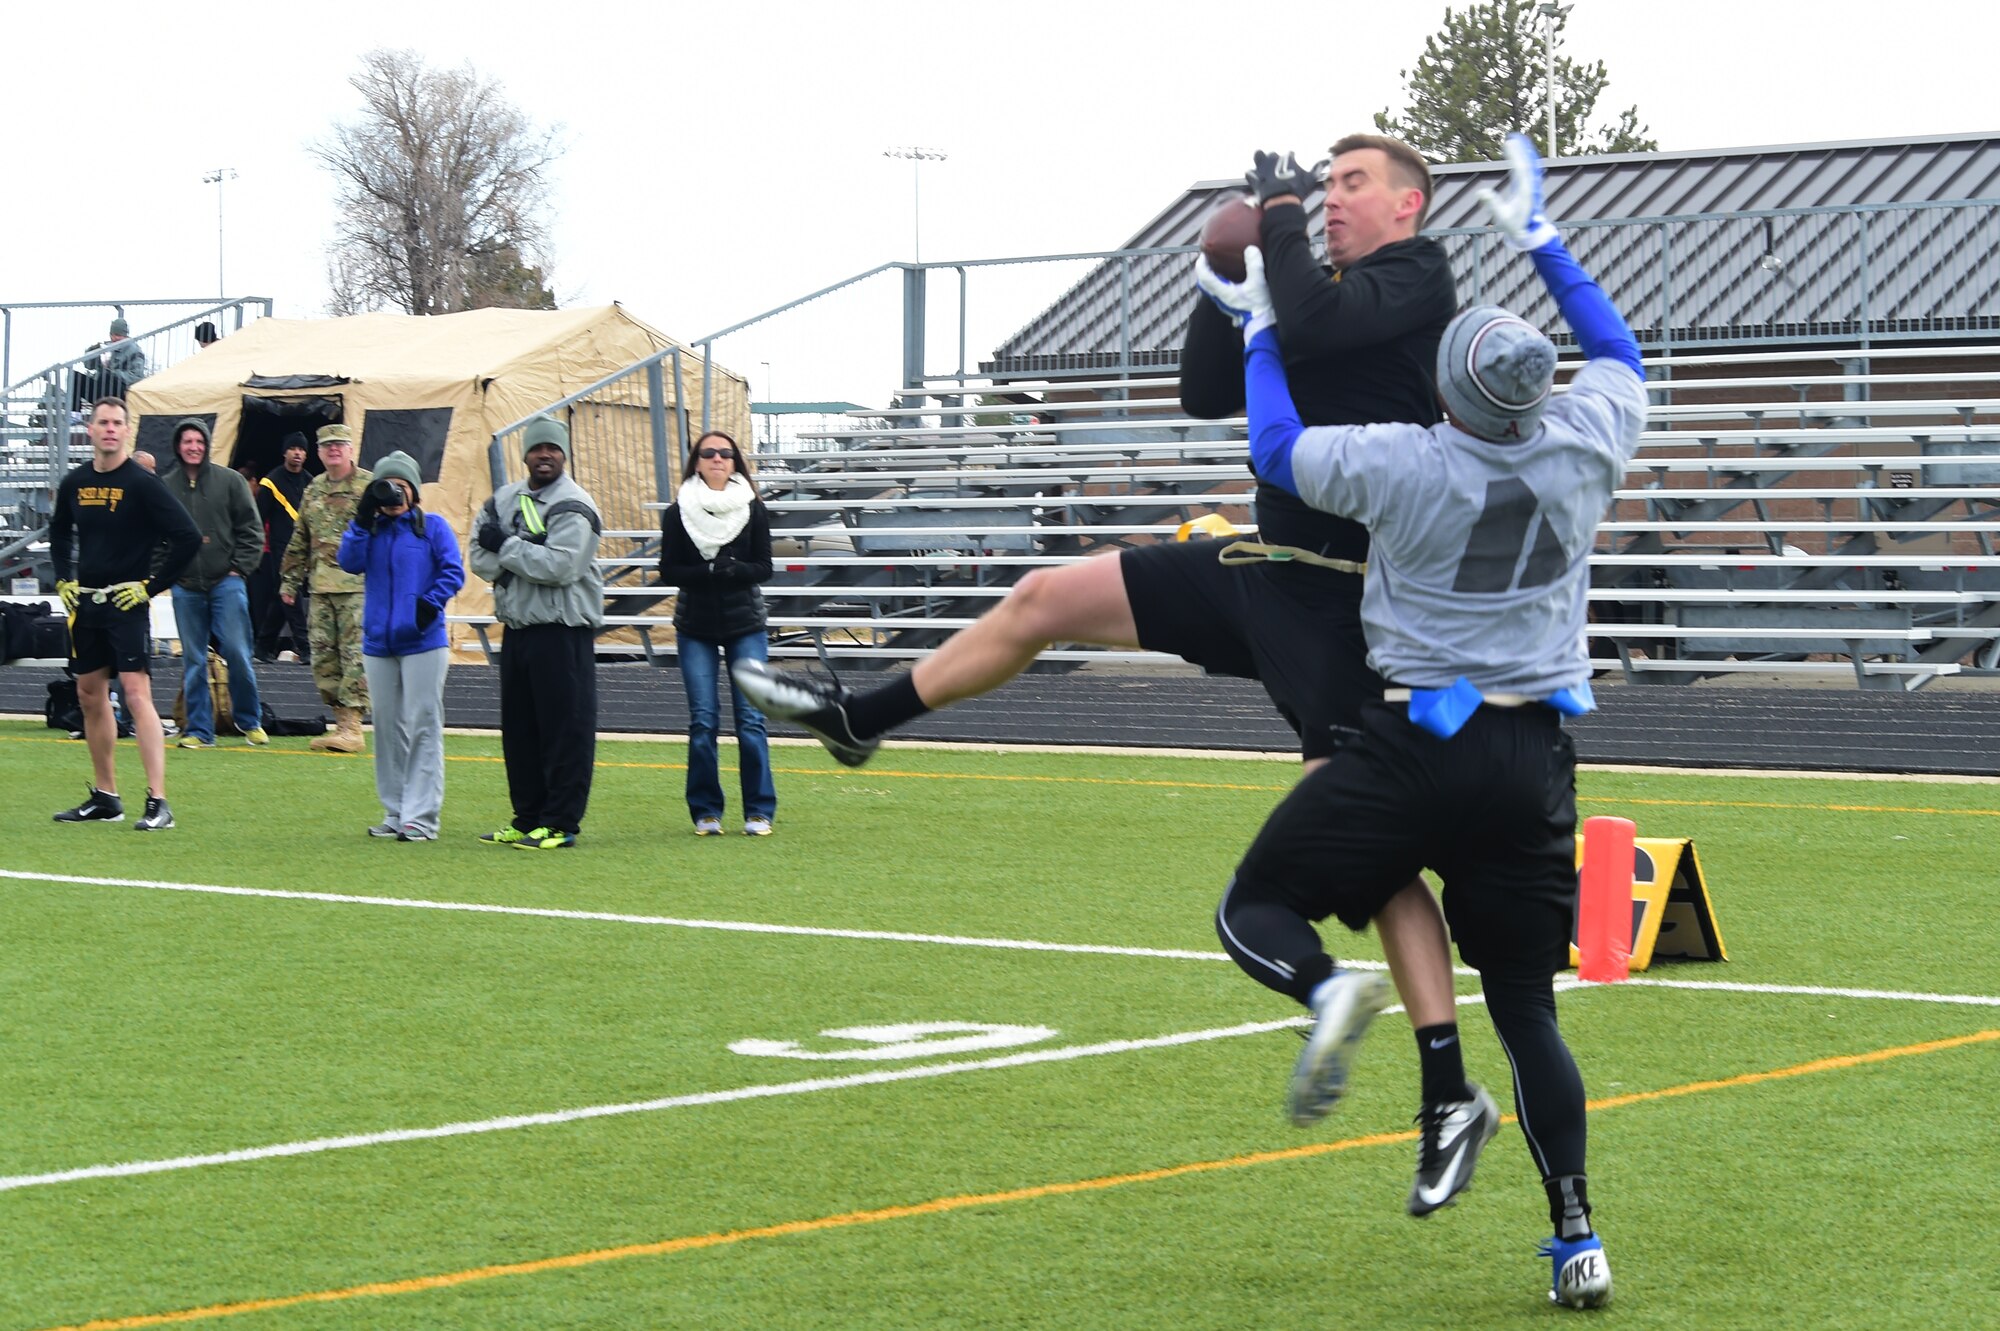 A member of the 743rd Military Intelligence Battalion officer team jumps to make a catch against defender Nov. 25, 2015, on Buckley Air Force Base, Colo. The final outcome of the game was 24 to 18 with the officers walking away with the victory. (U.S. Air Force photo by Airman 1st Class Luke W. Nowakowski/Released)